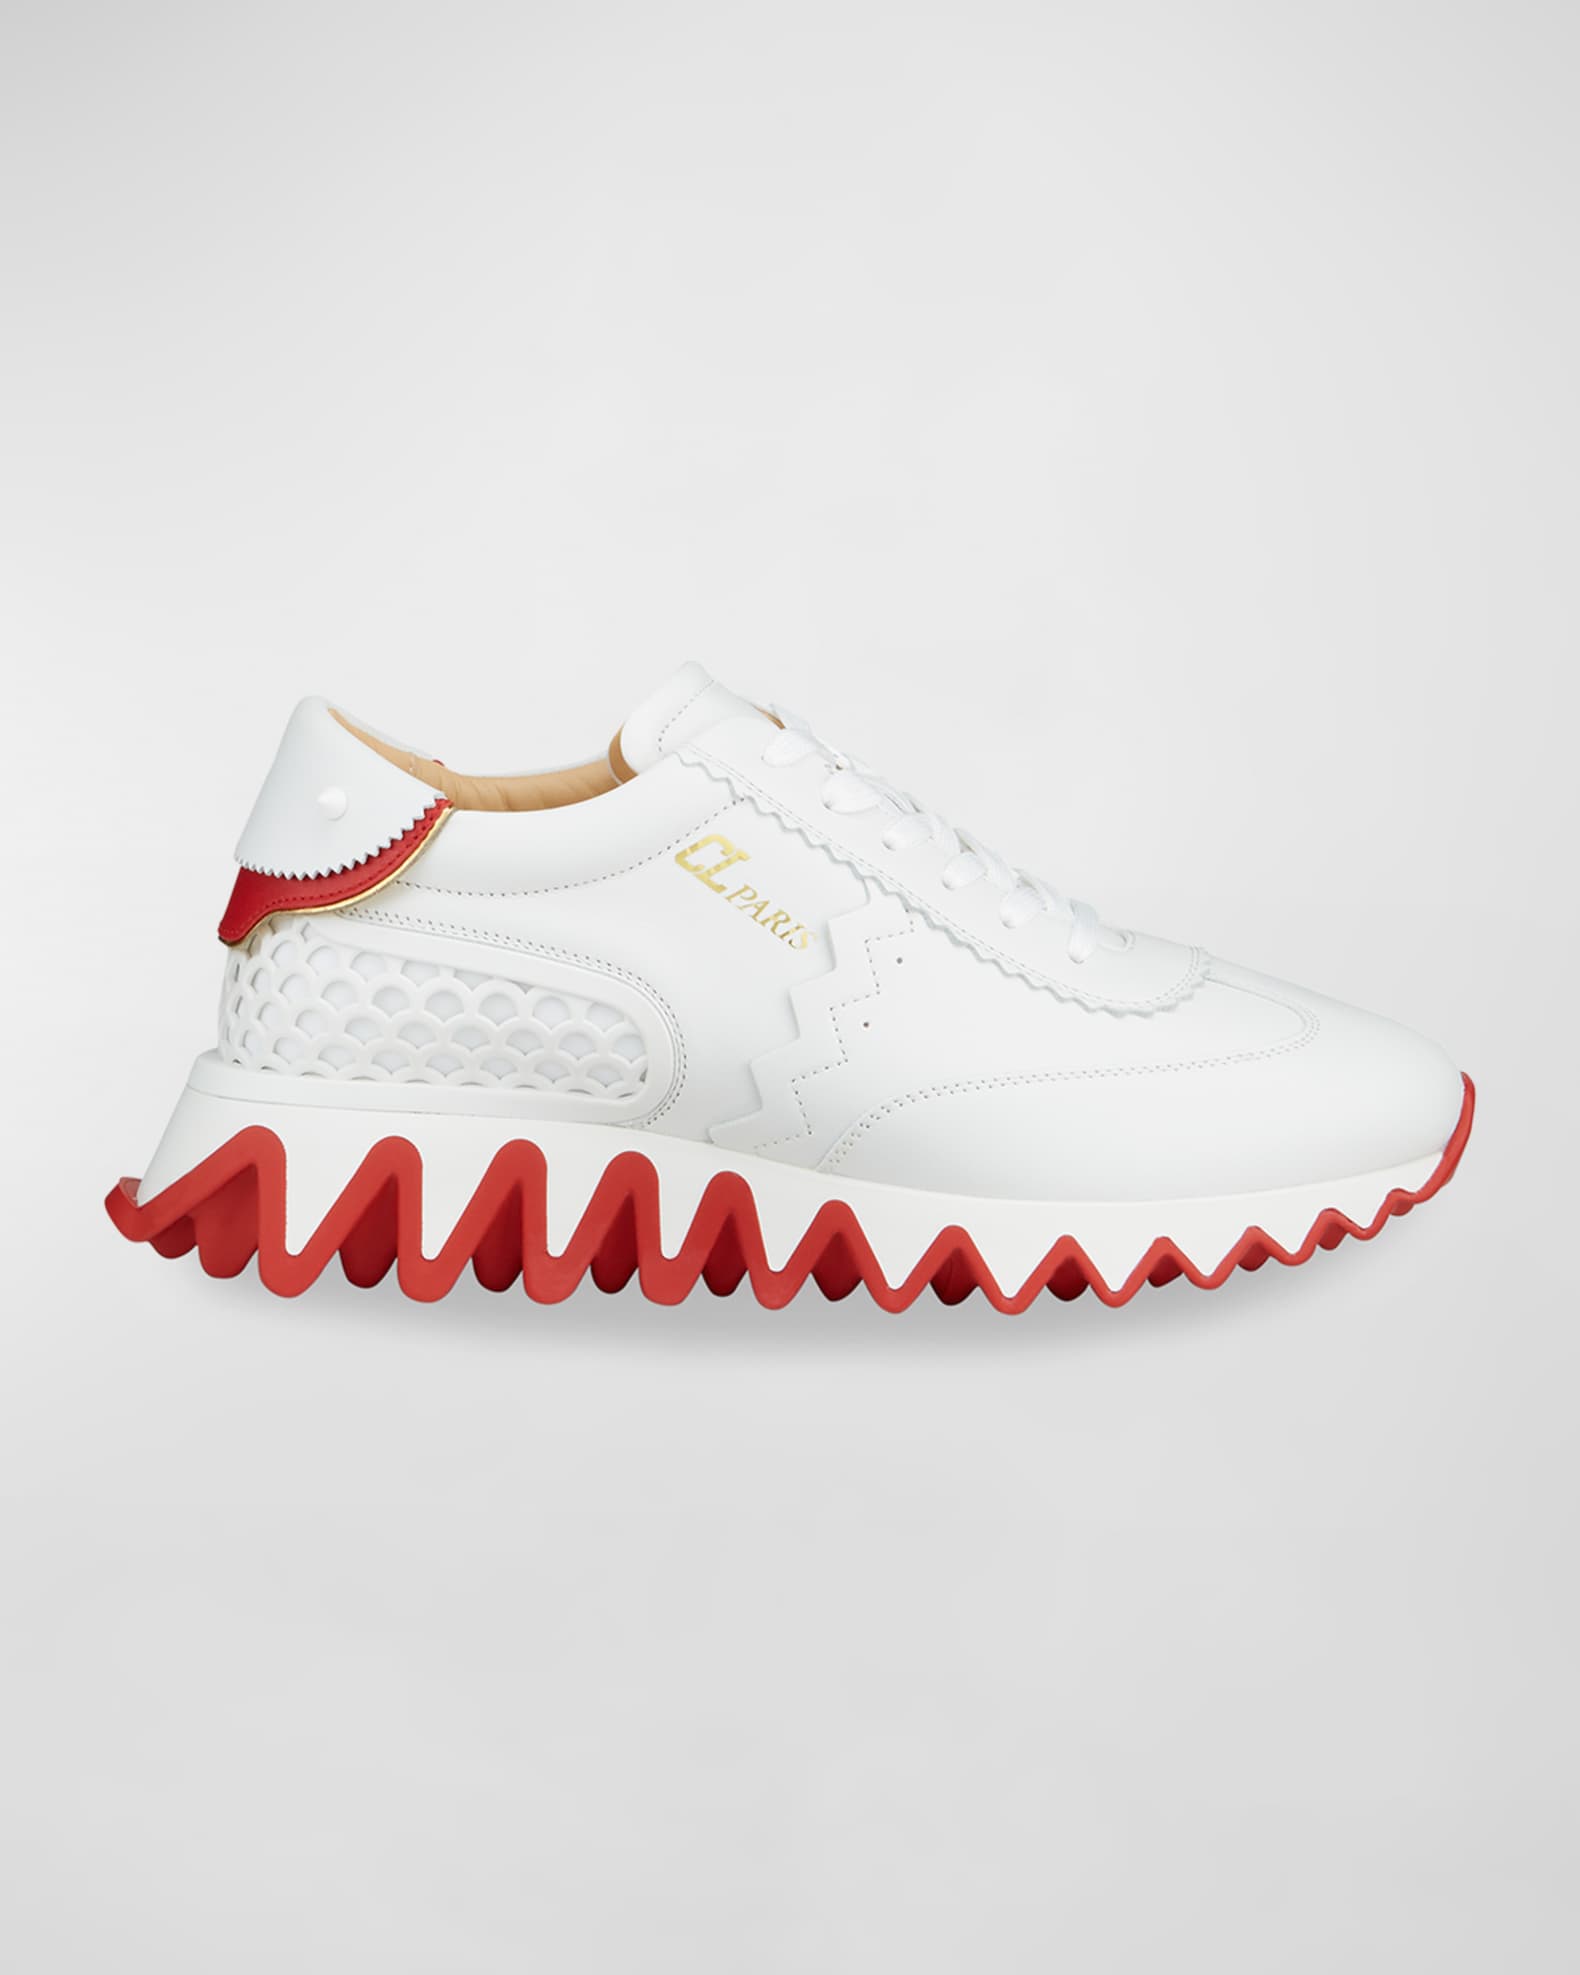 Loubishark Suede Sneakers in Red - Christian Louboutin